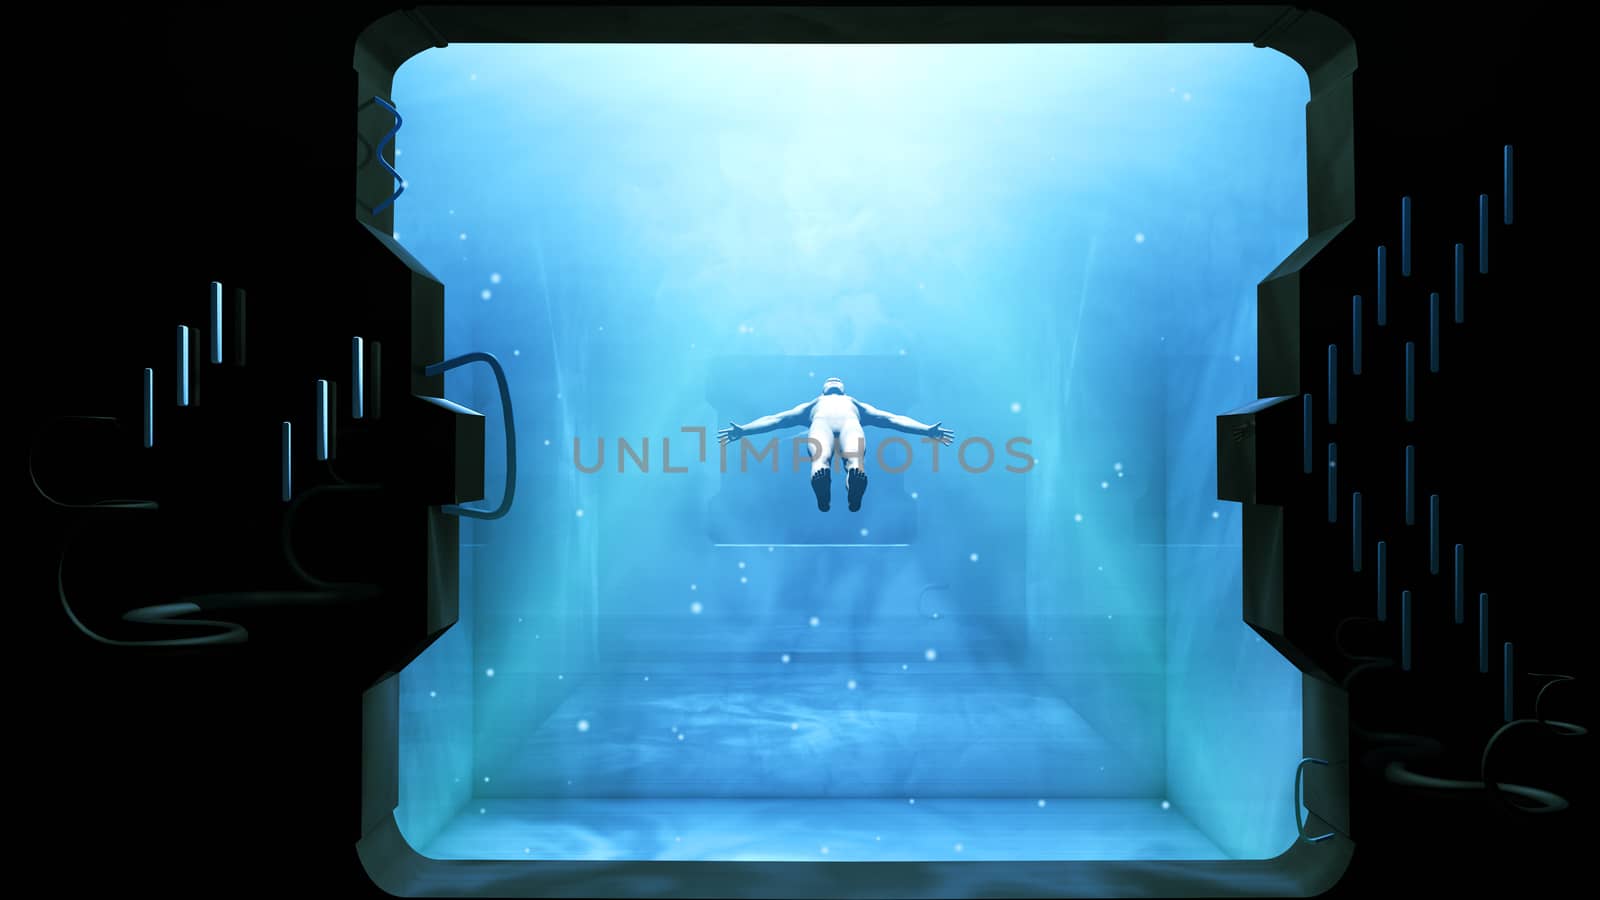 Sci-fi 3d illustration of a flying spaceman soaring in the optimistic new born world with sun rays, blue sky and shining stars, seen through a square porthole.